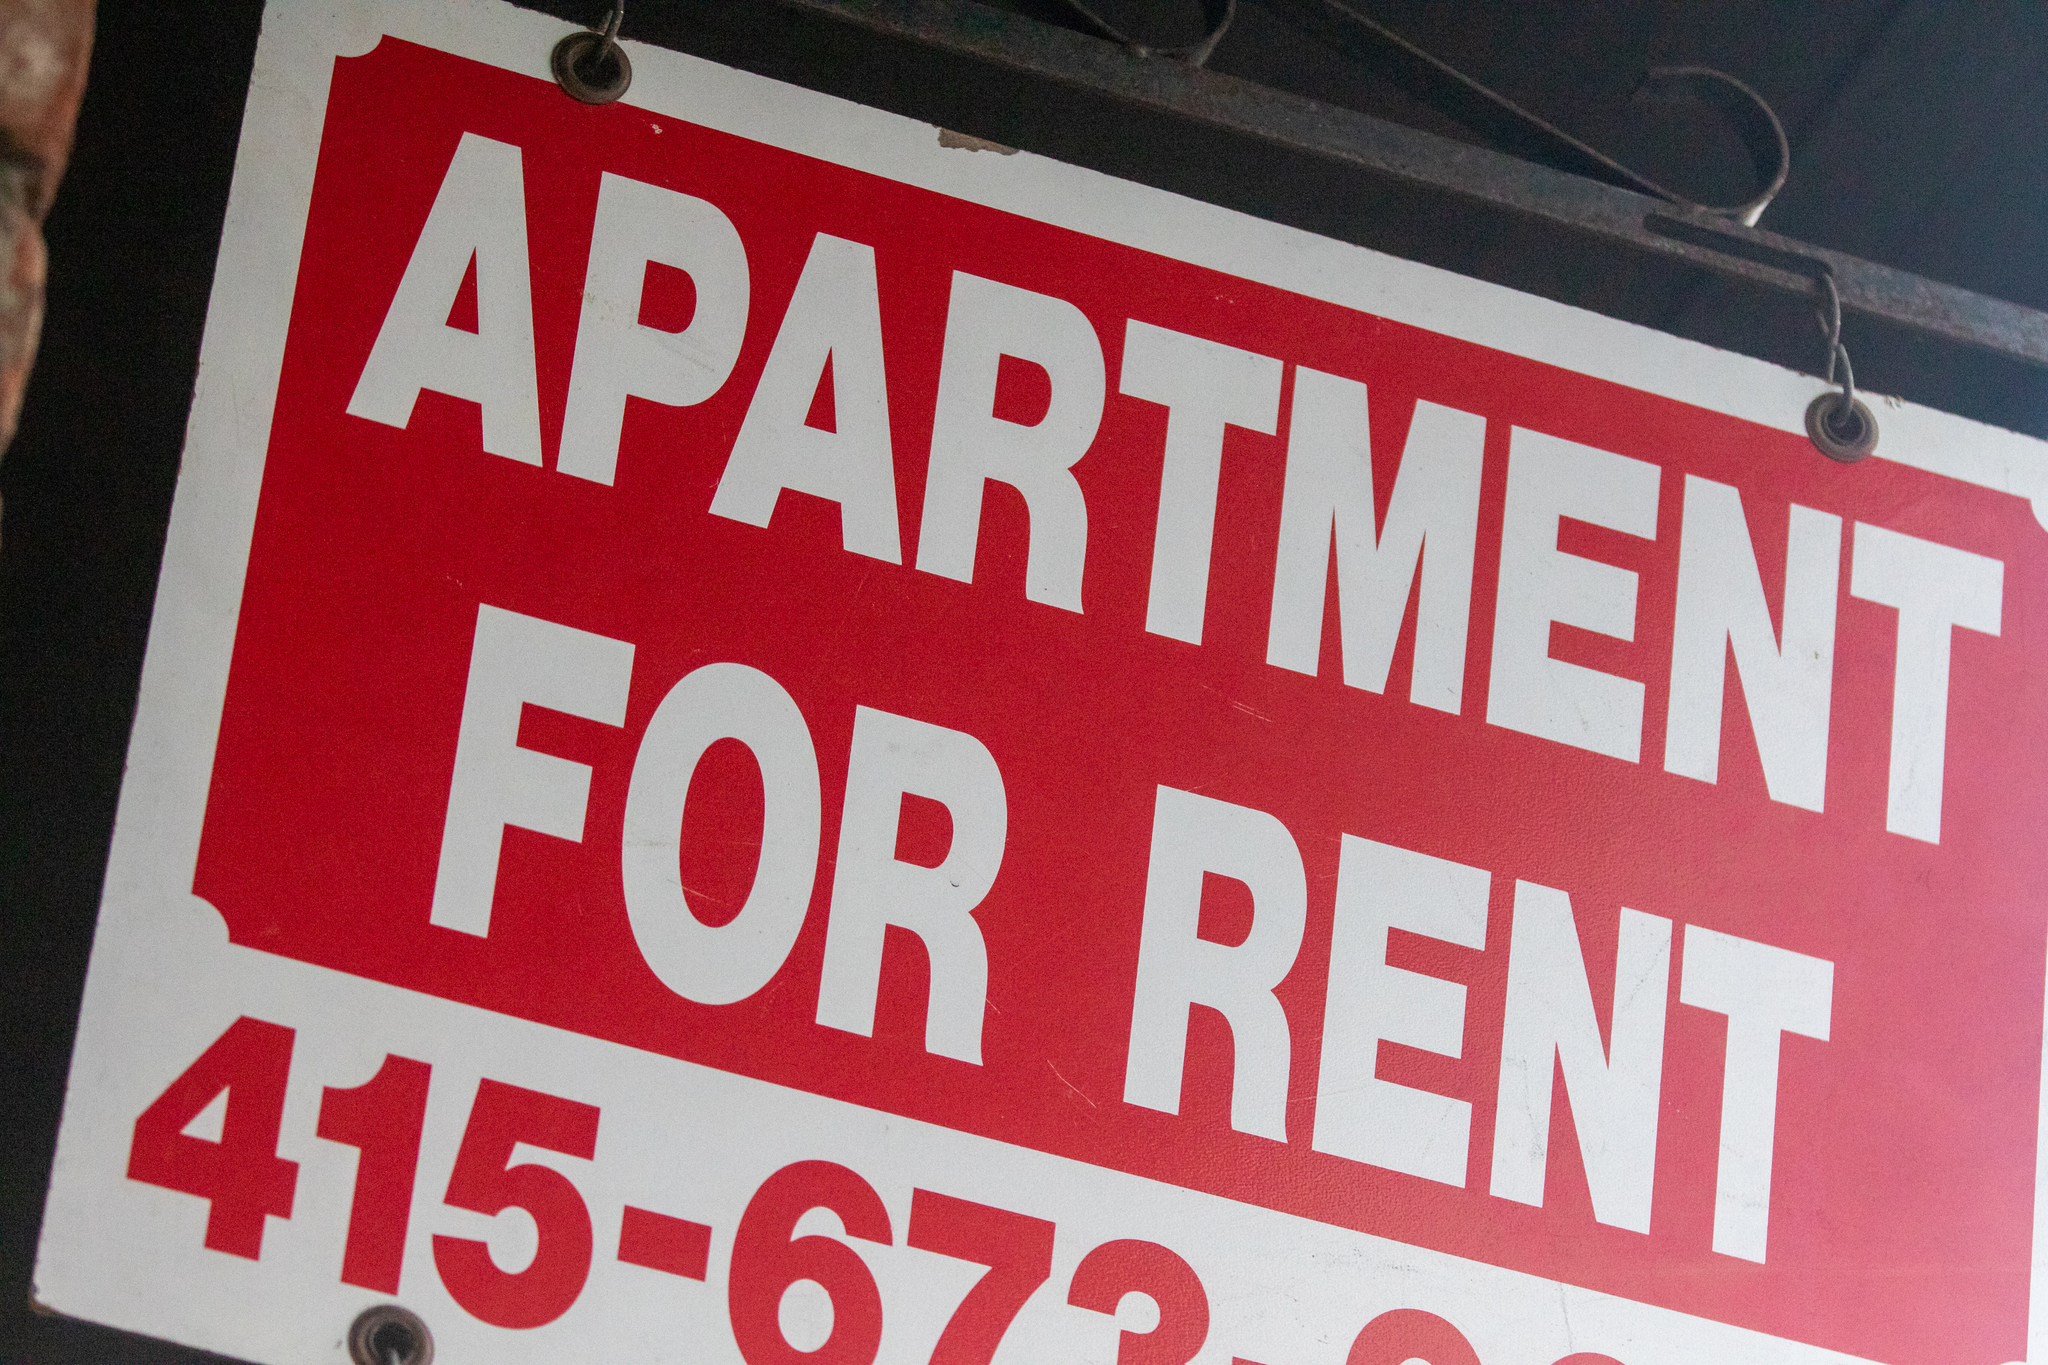 San Francisco drops to third most expensive city for renting an apartment